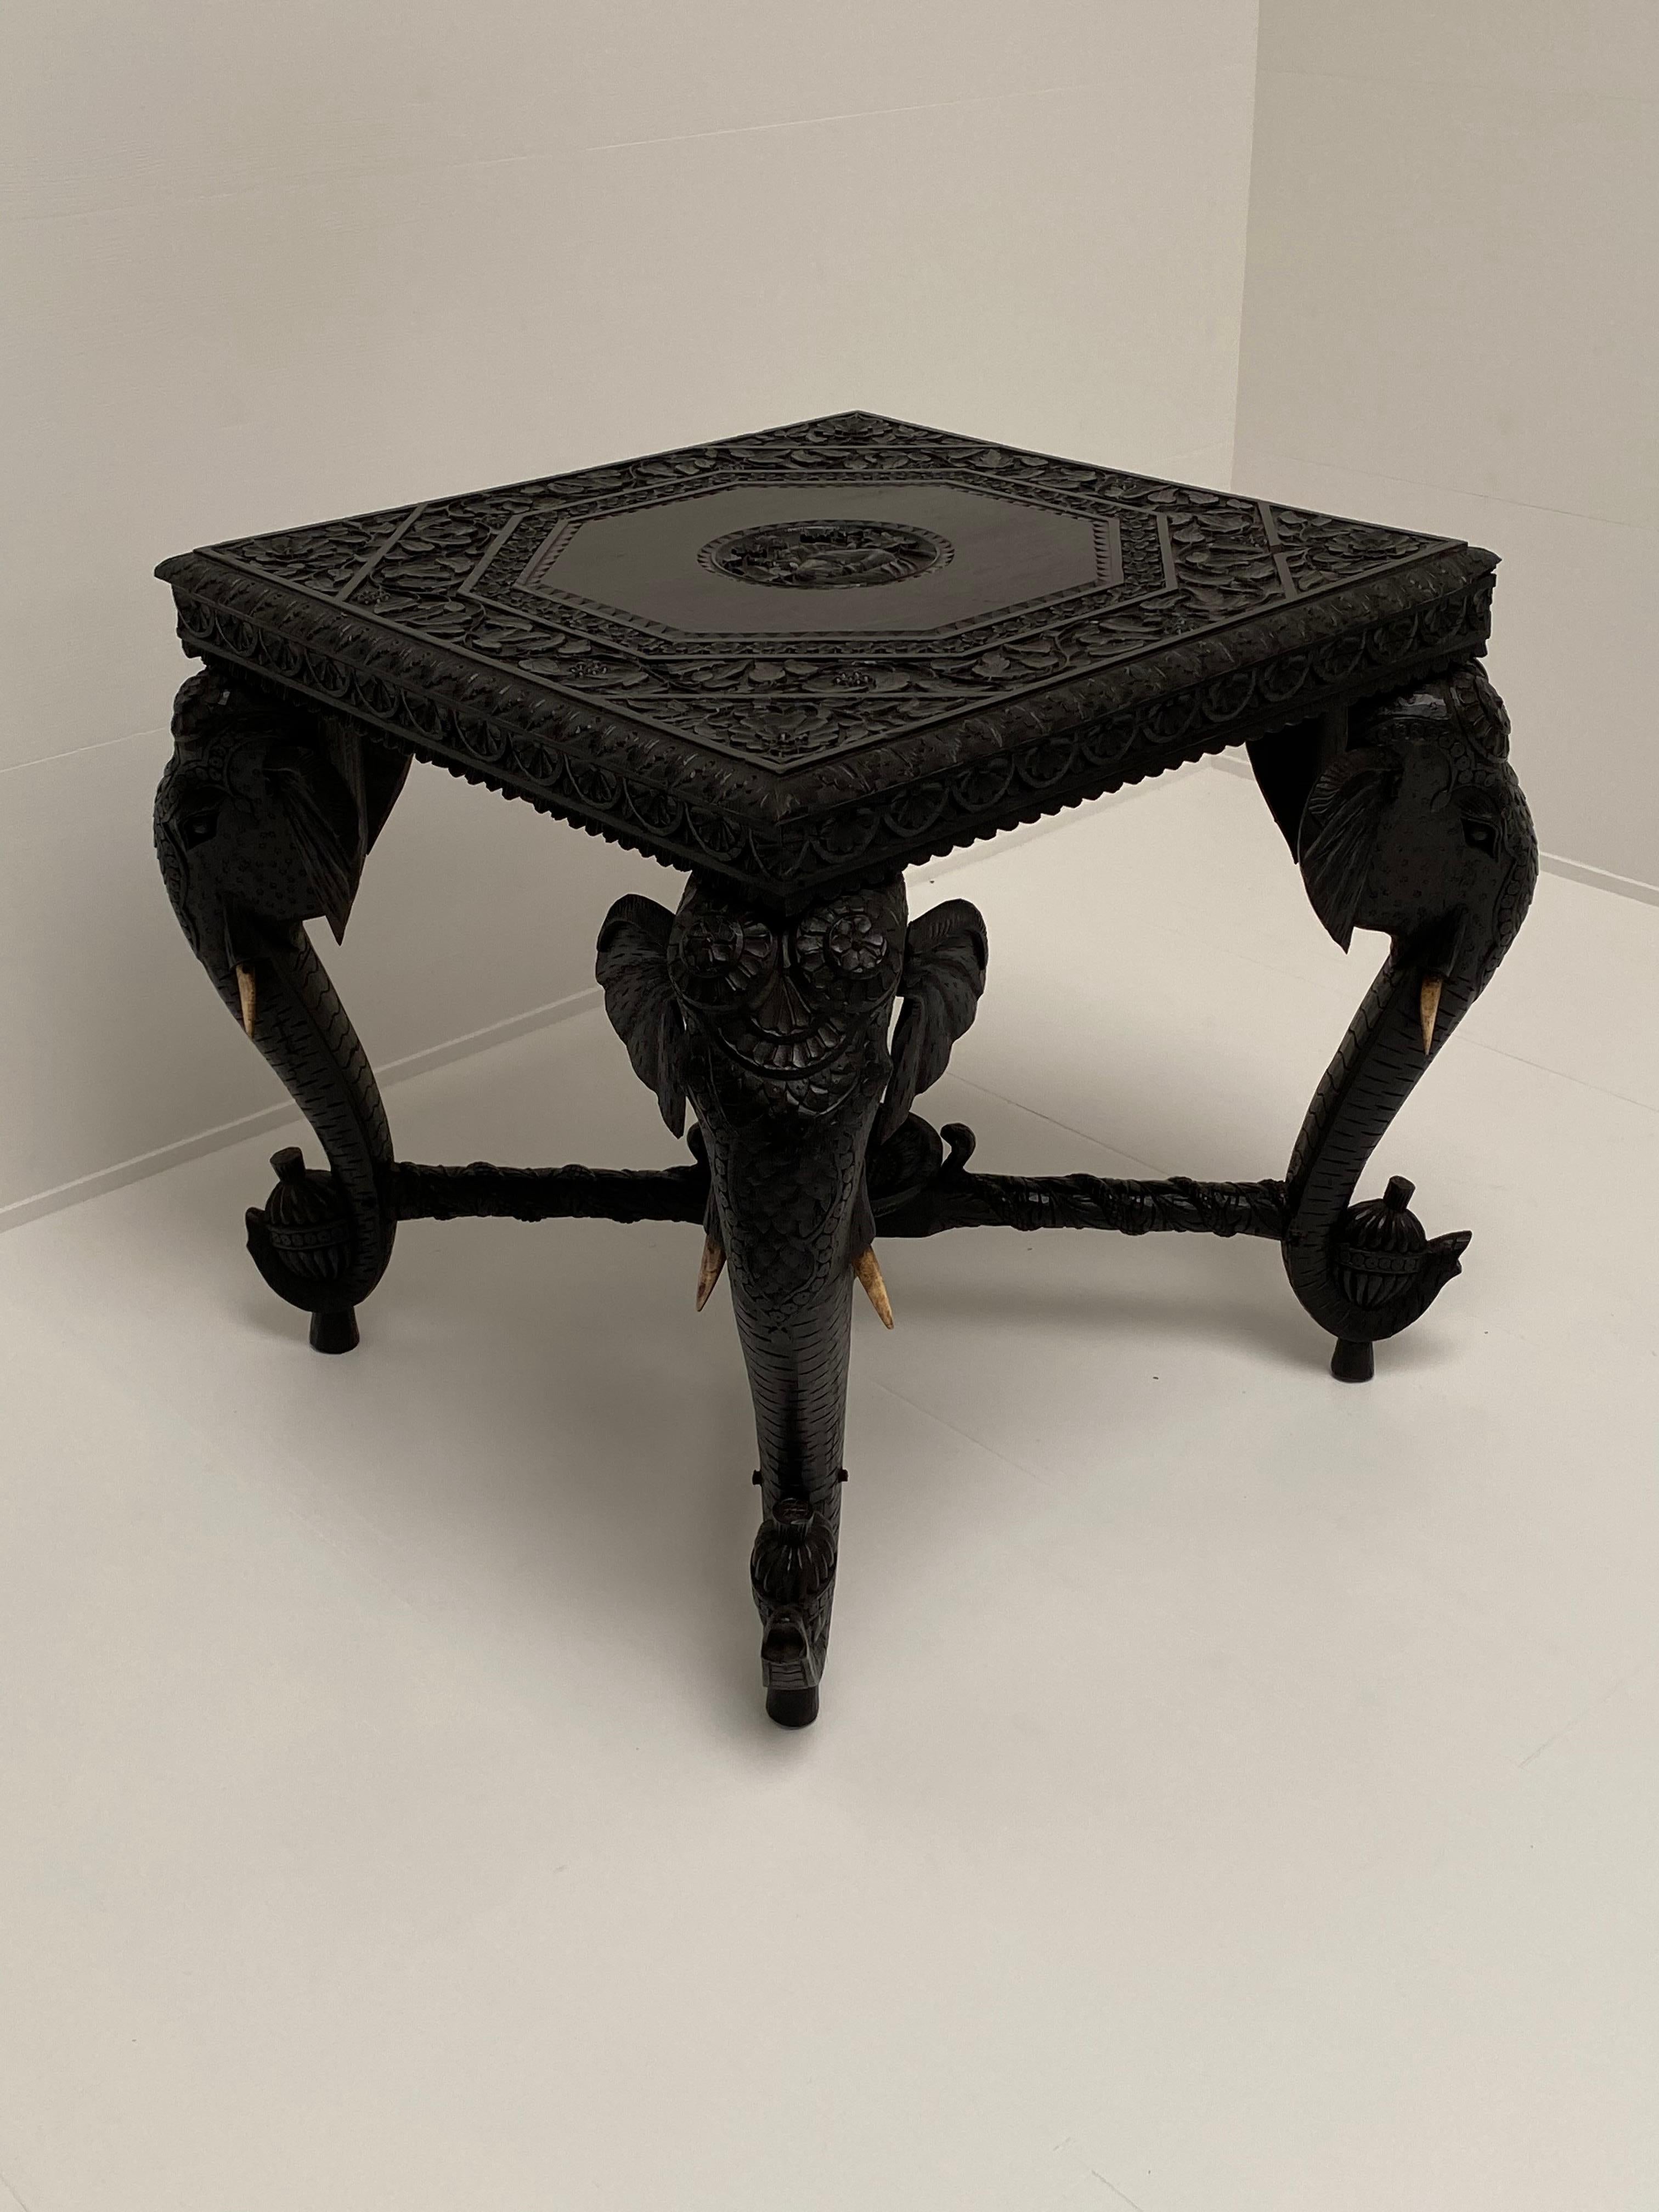 Nice carved ebony dark side table,
beautifully carved elephant heads, nice floral carvings
Asian origin.